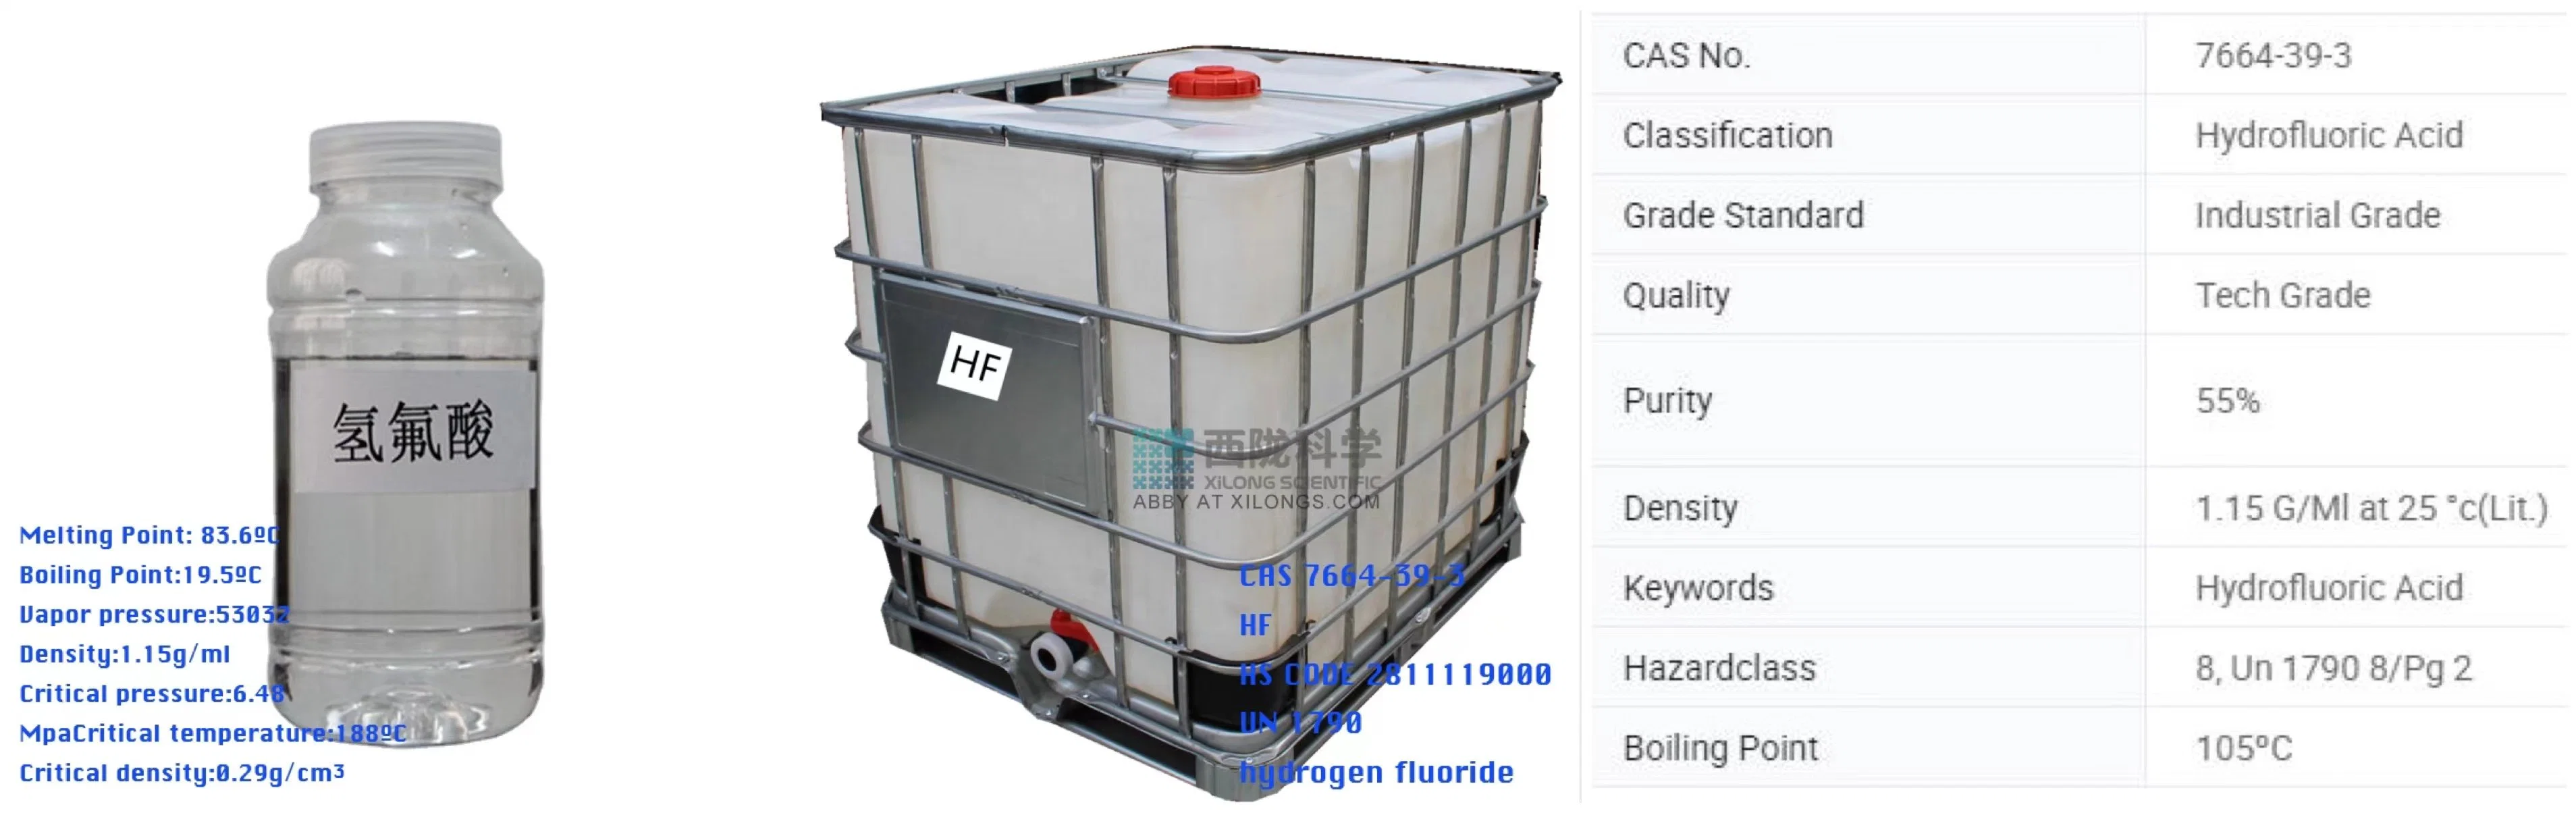 Competitive Factory Price for Industry Grade Chemical CAS 7 664-39-3 Hf Acid Hydrogen Fluoride Hydrofluoric 55% 70%